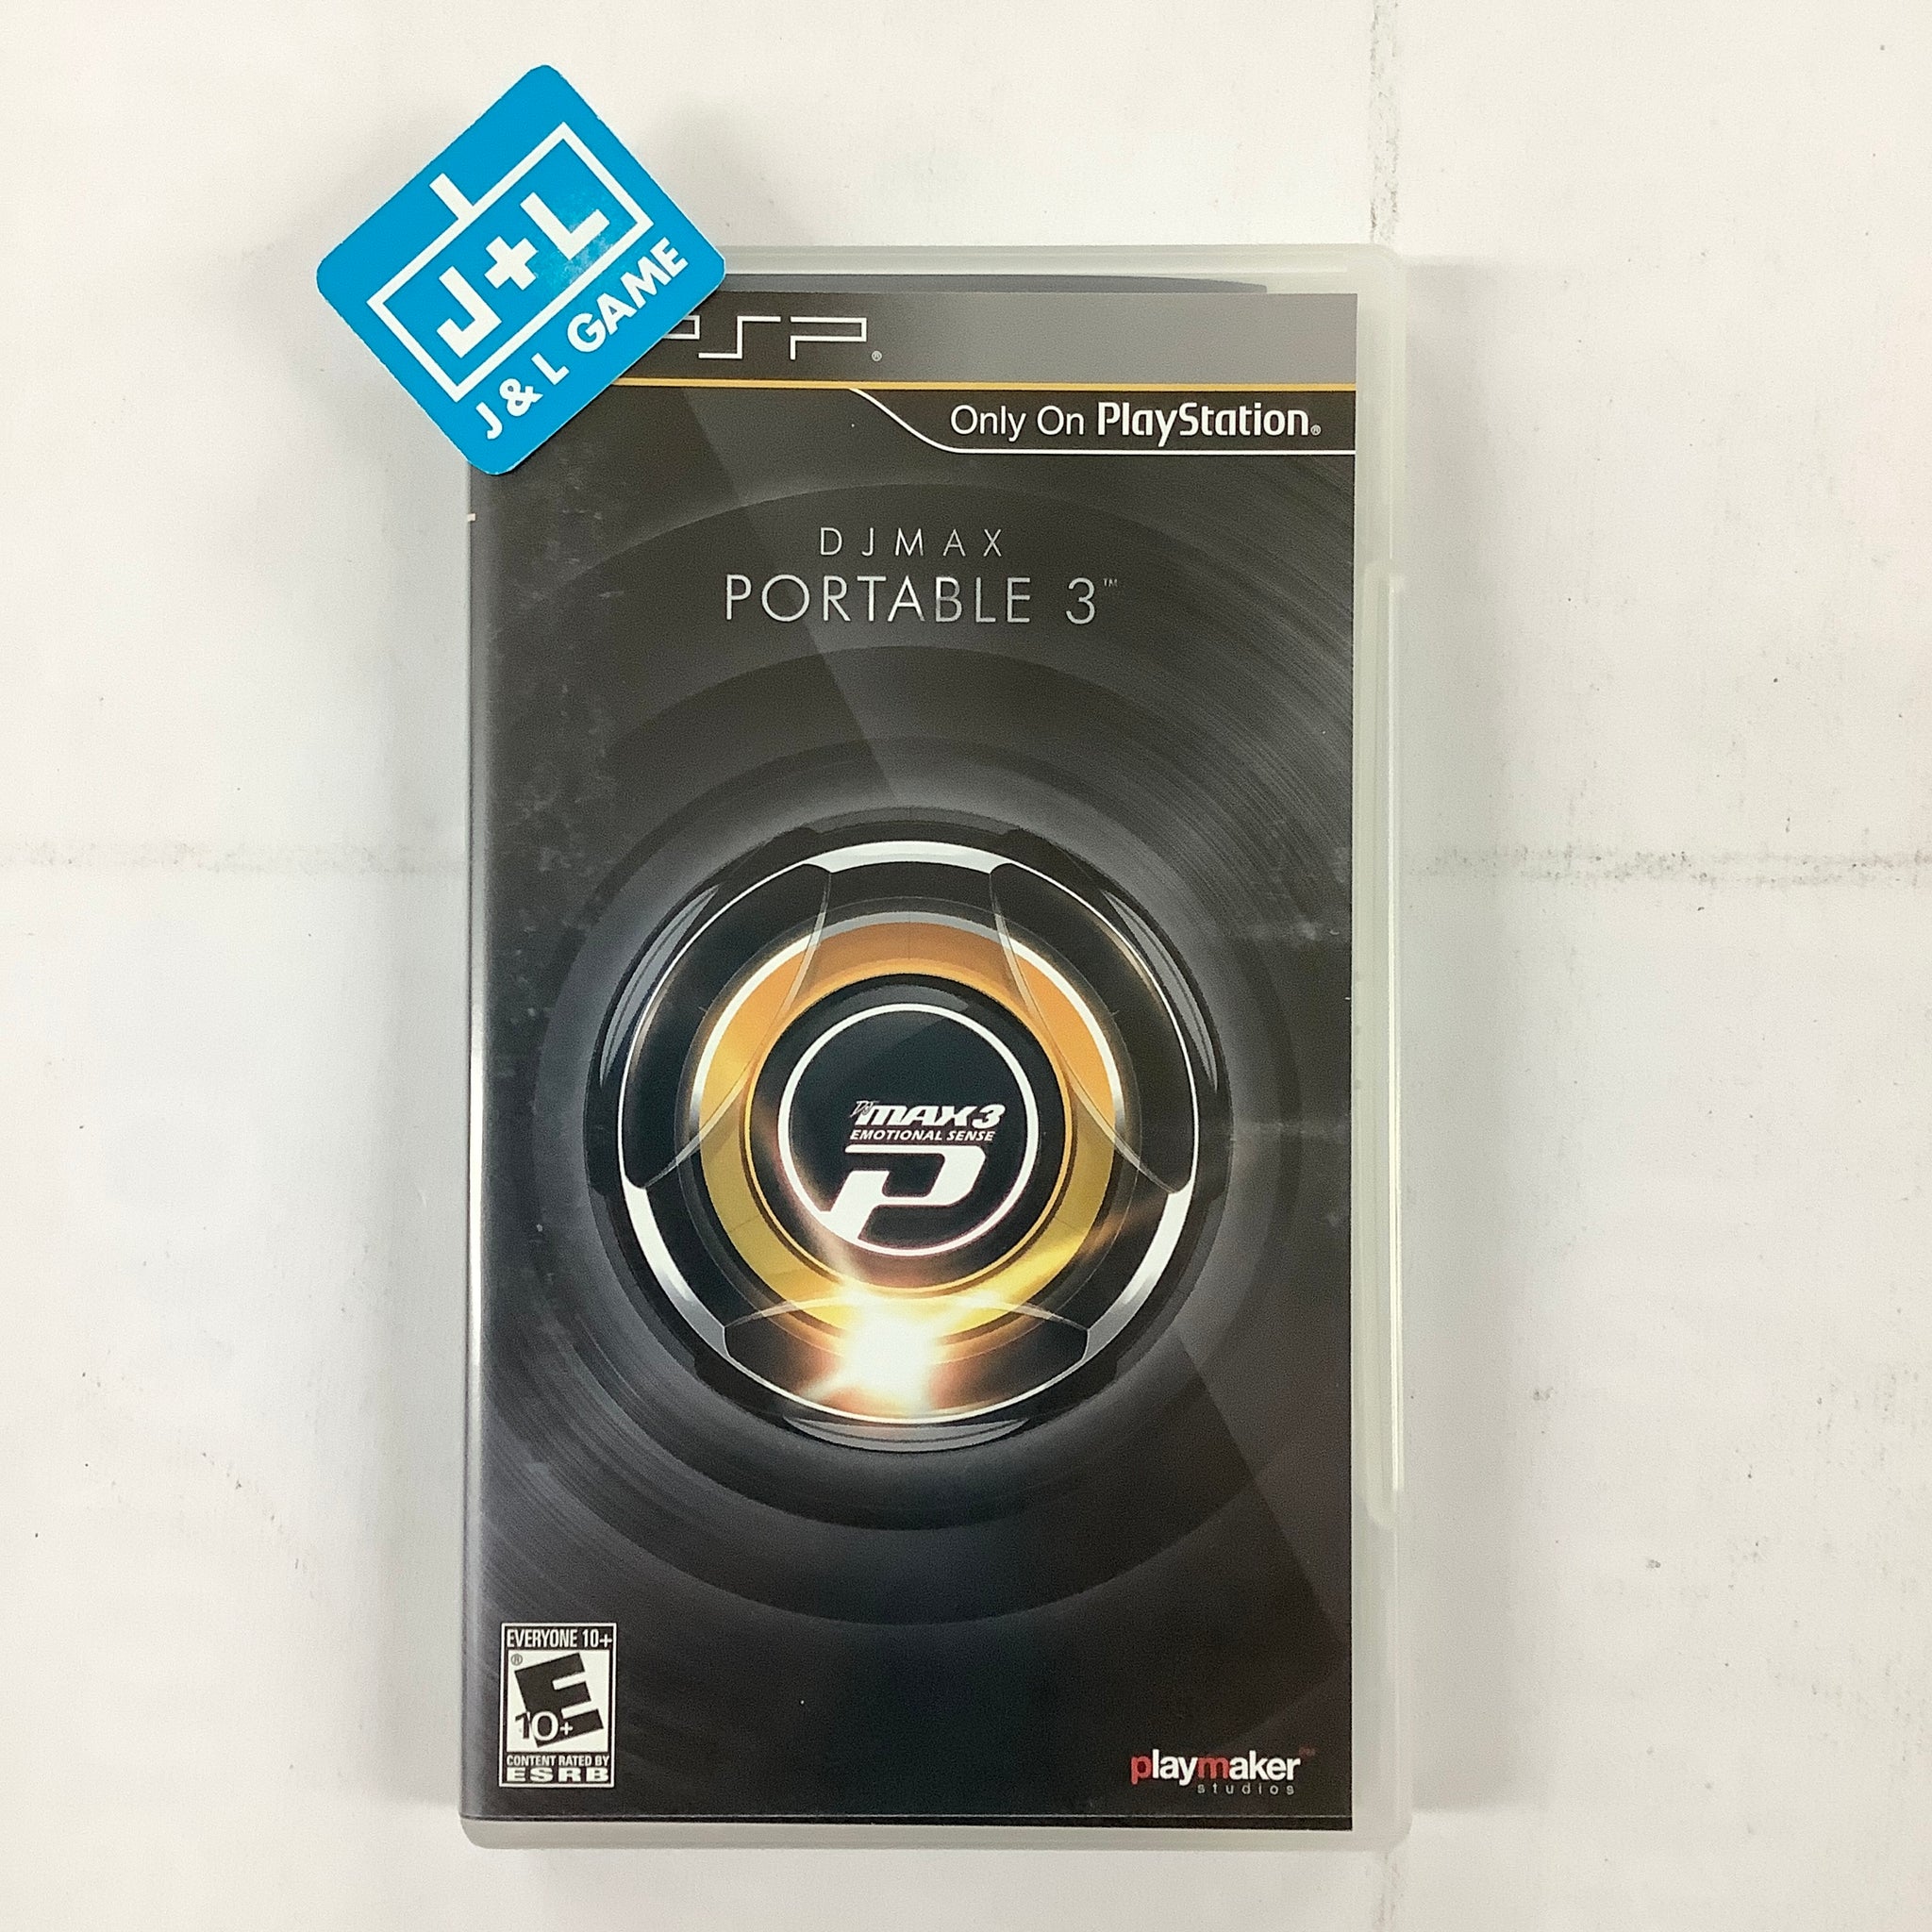 DJ Max Portable 3 - Sony PSP [Pre-Owned] Video Games PM Studios Inc.   